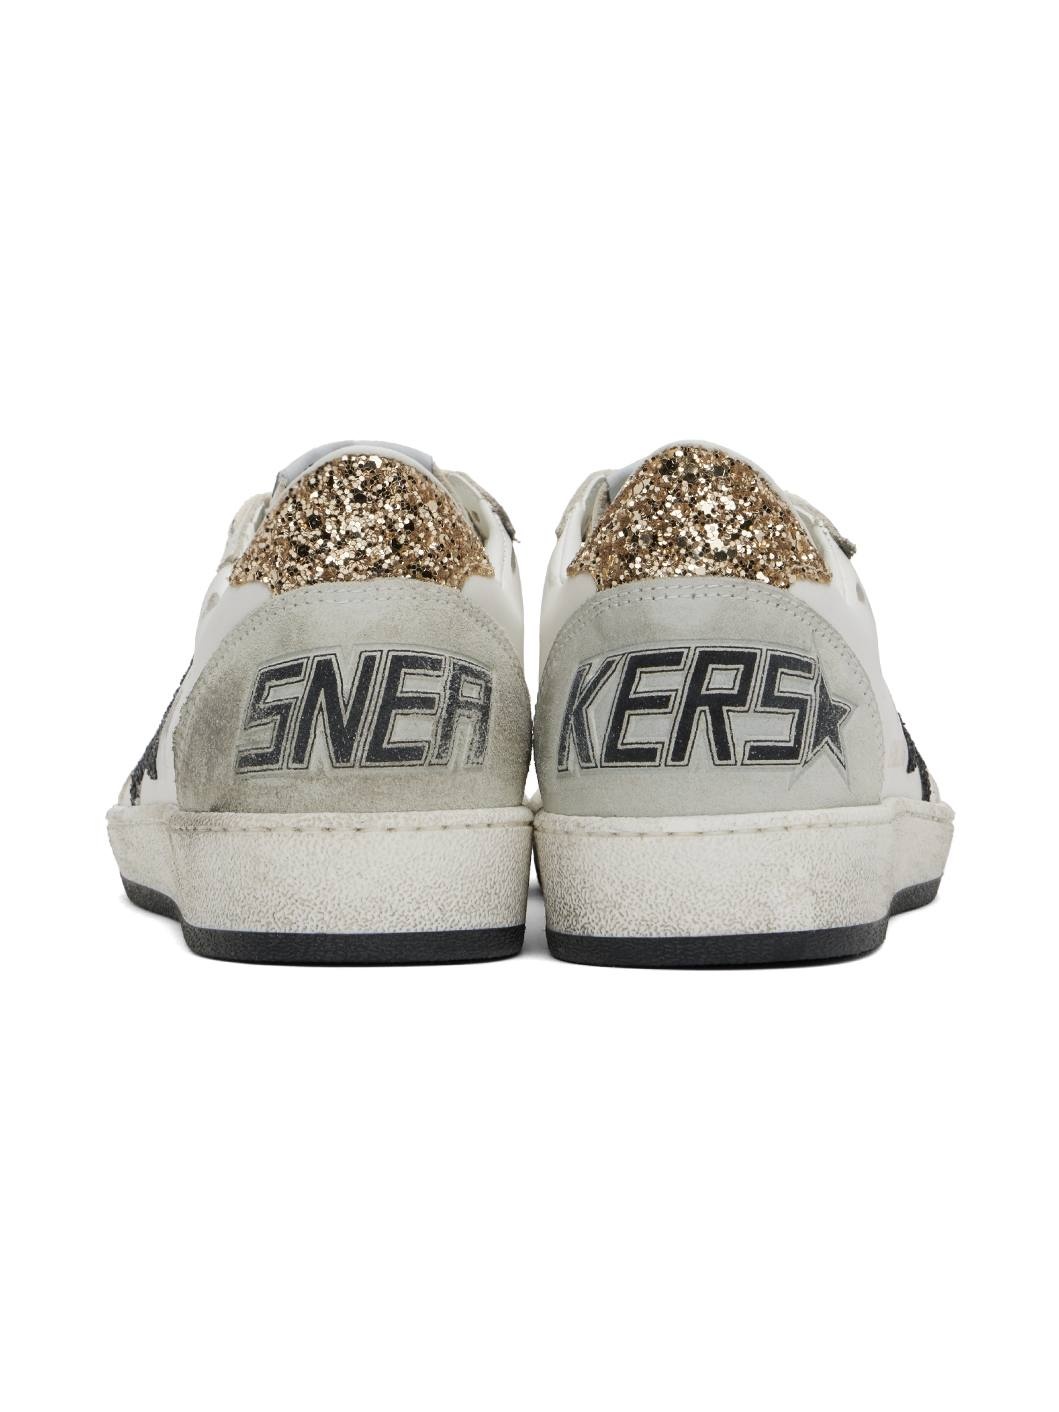 Off-White Ball Star Sneakers - 2